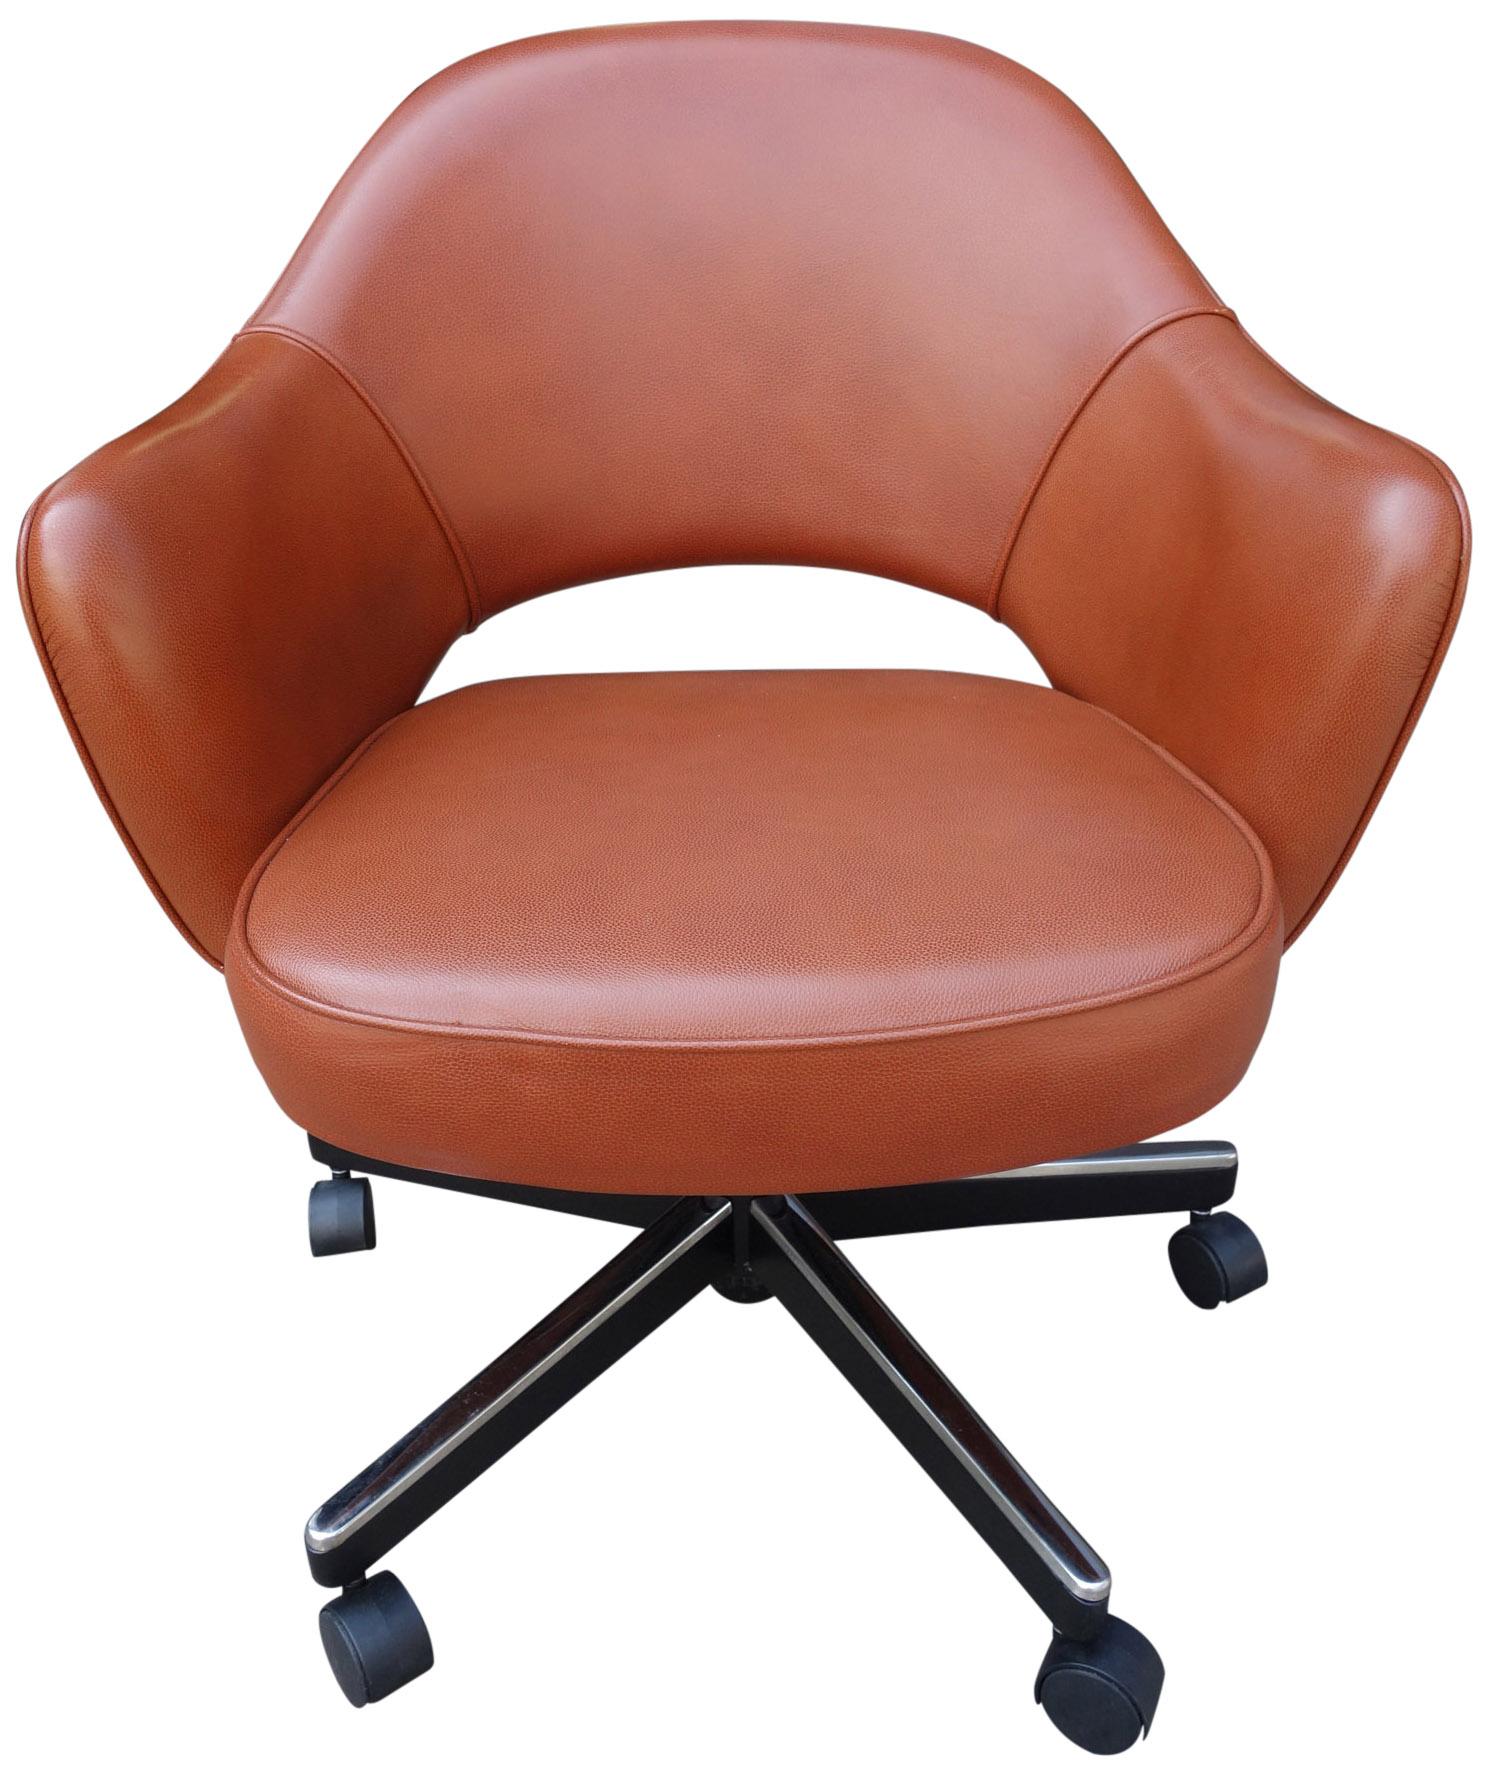 For your consideration are ten Executive chairs in saddle brown leather. All with adjustable pneumatic height and tilt positions. This Iconic design has been a favorite in both the home and corporate settings due to its sharp looks and comfort. Seat